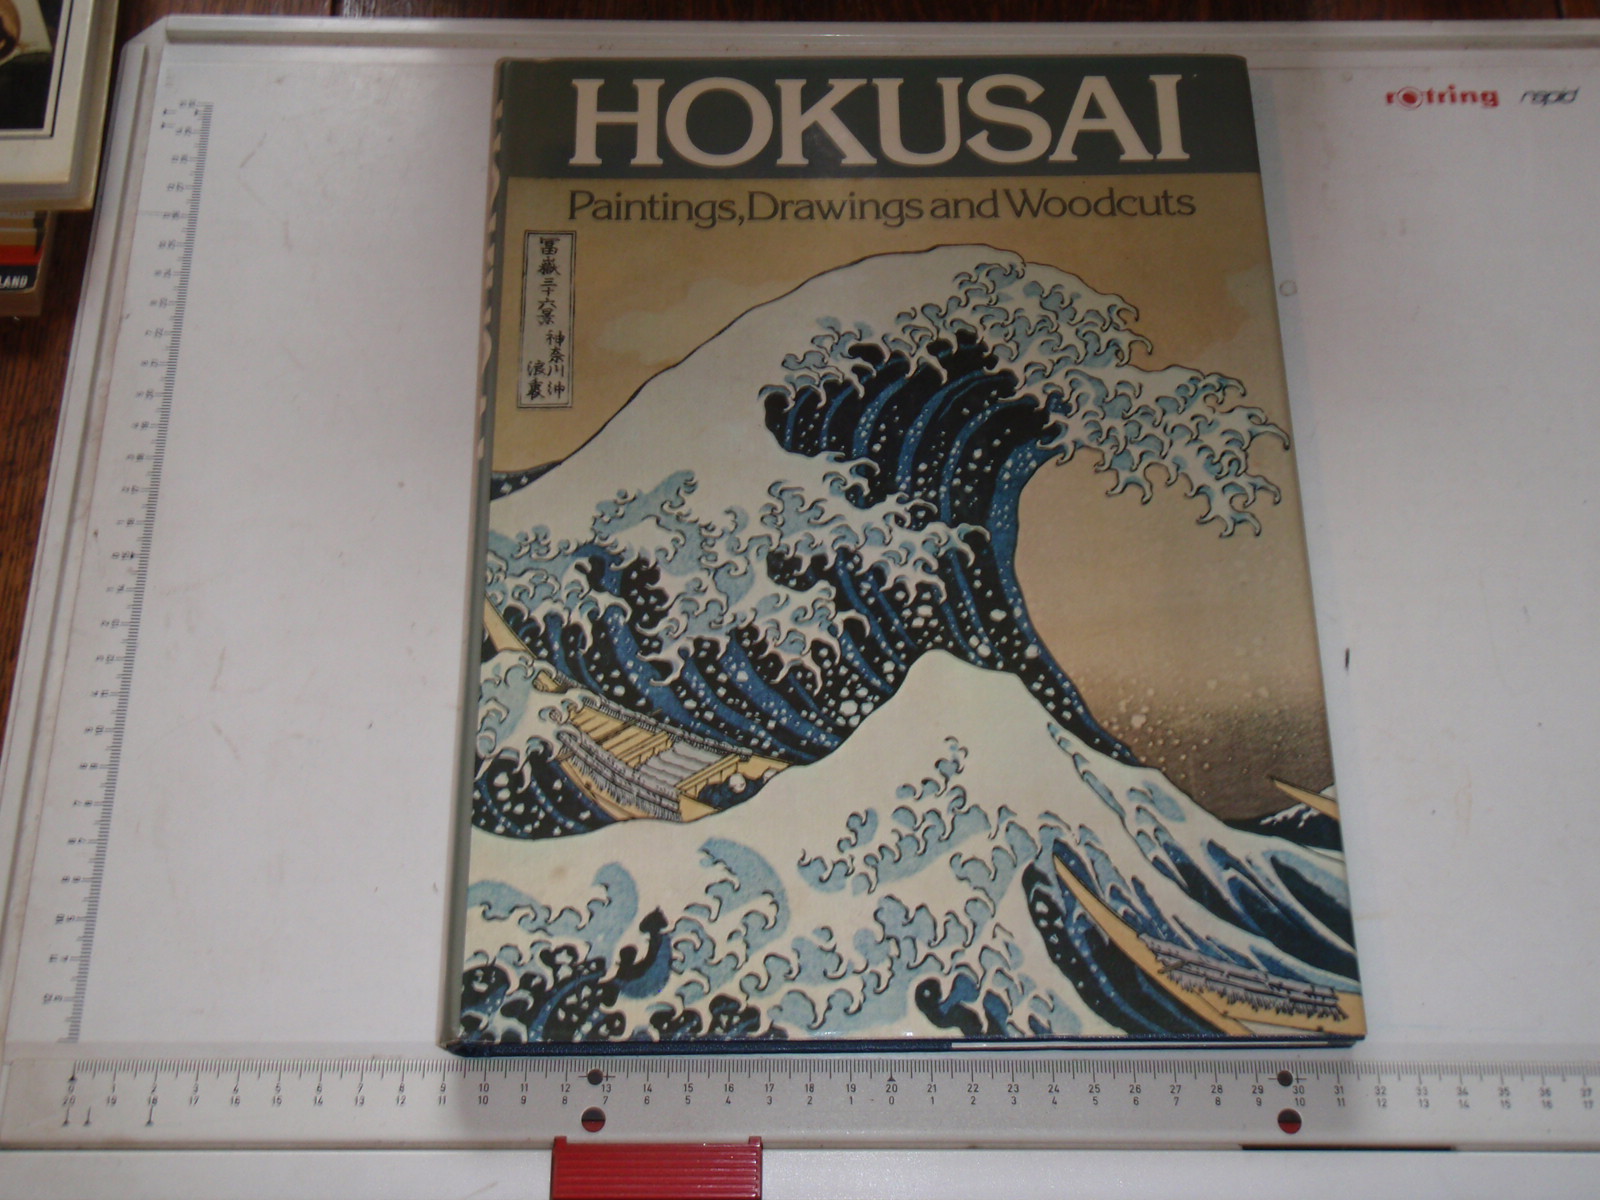 Hokusai: Paintings, Drawings and Woodcuts - J. Hillier